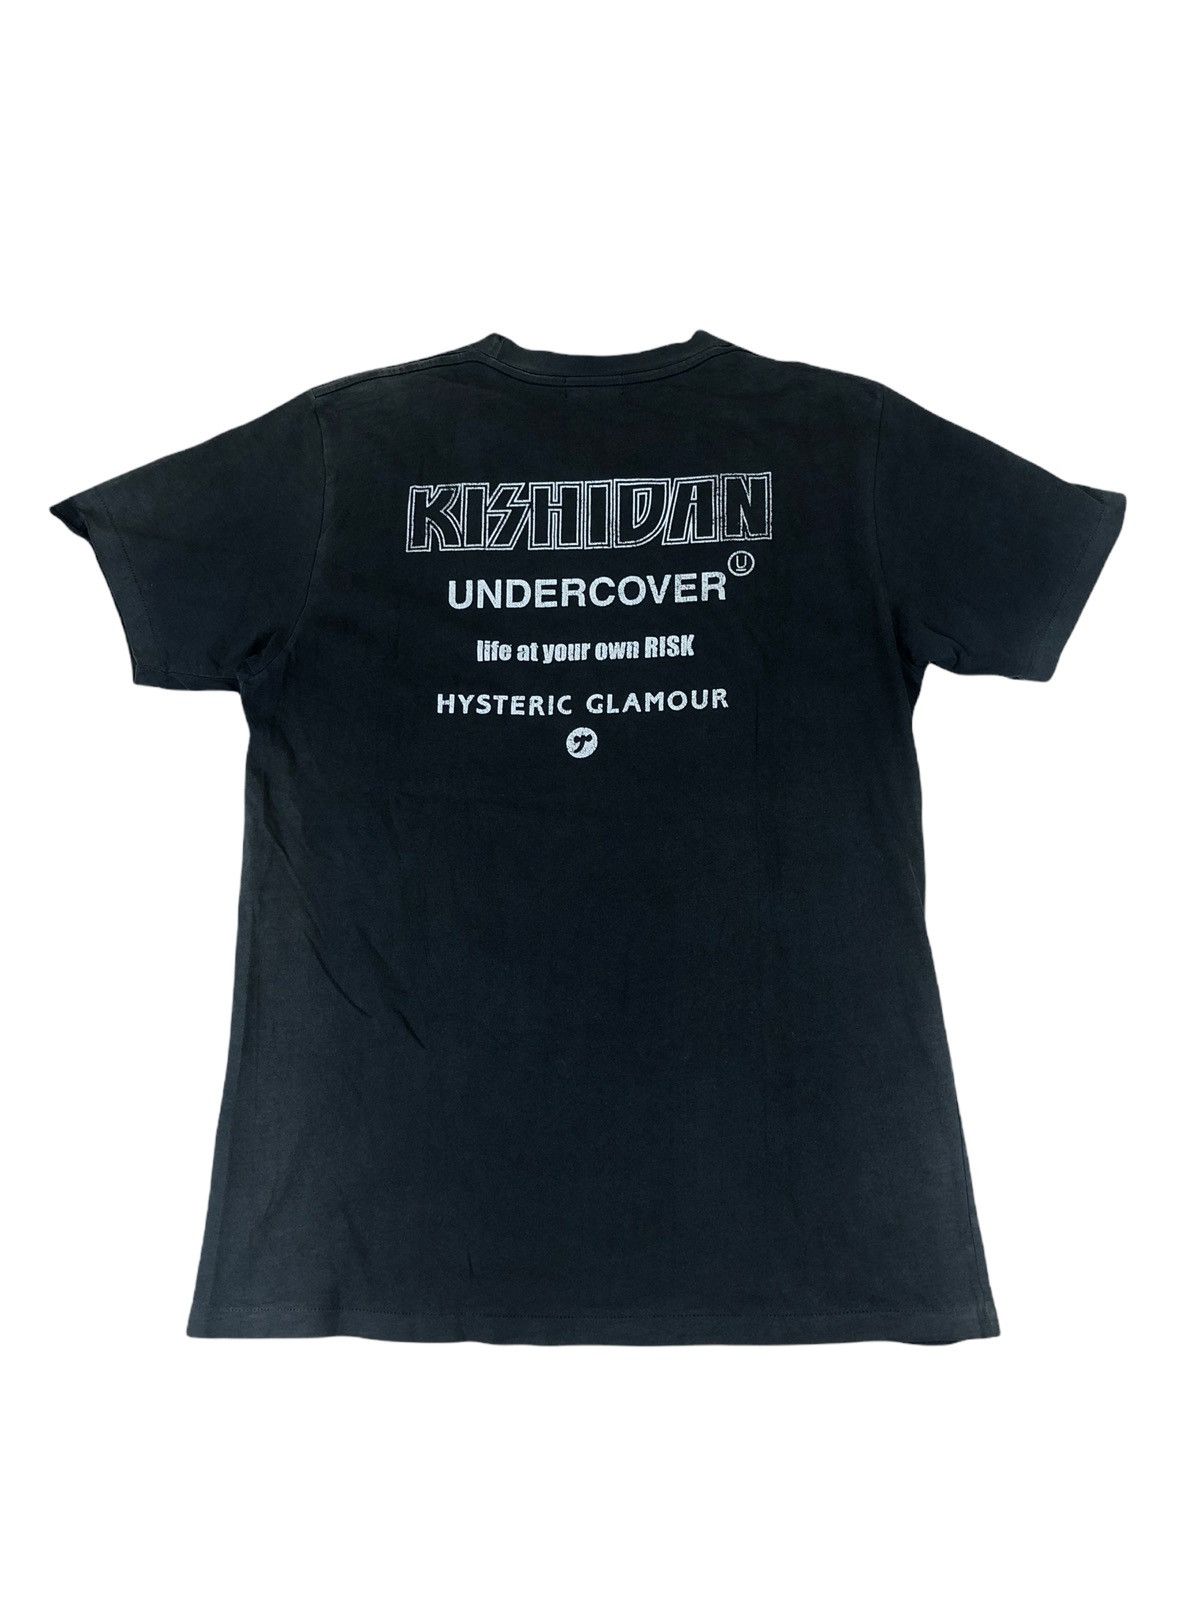 Undercover 2000s Hysteric Glamour Undercover Distressed Shirt